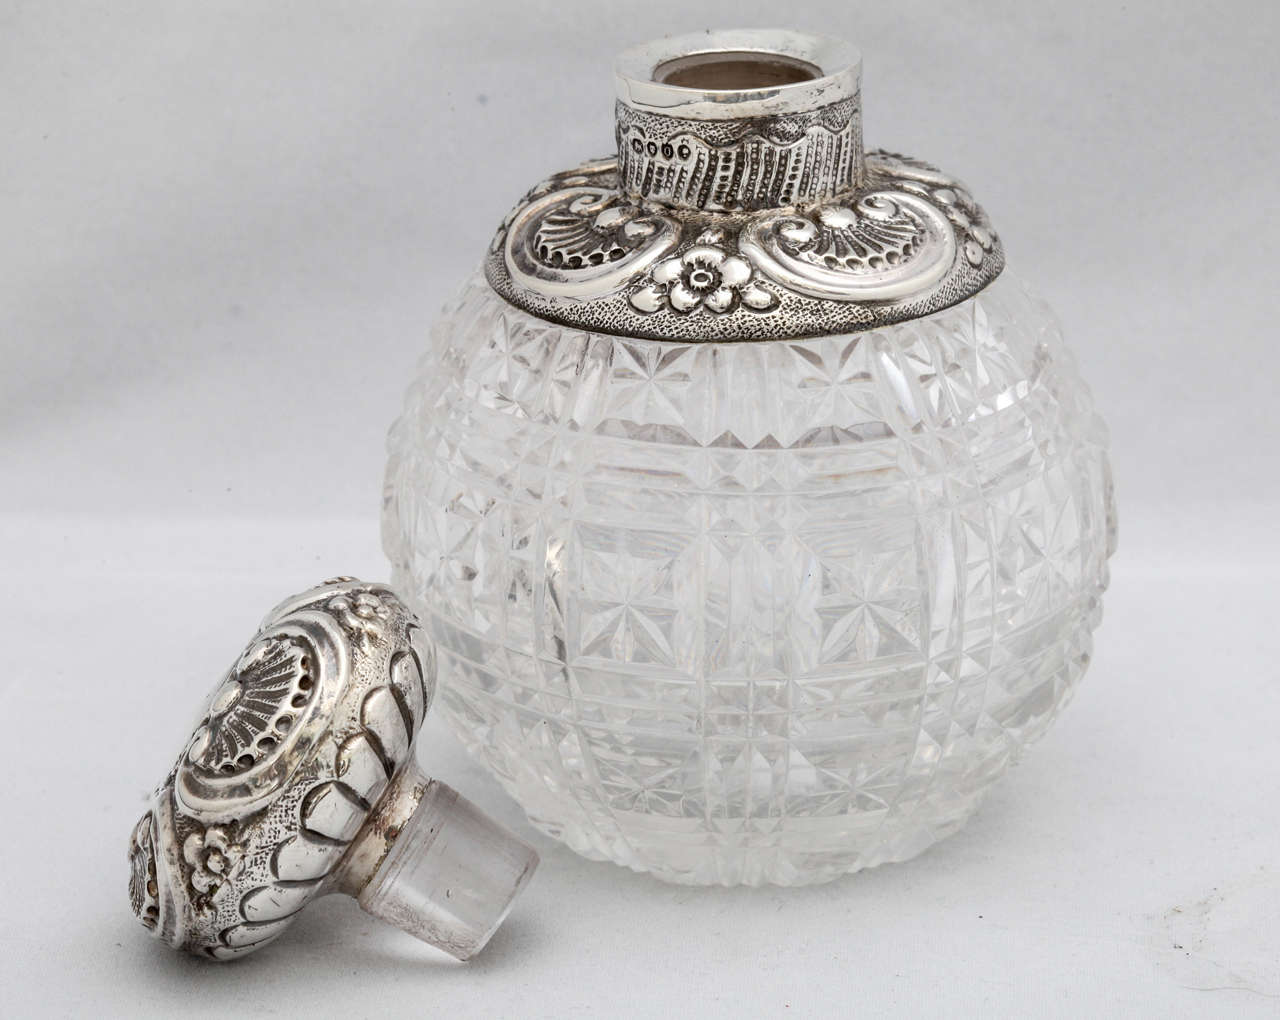 Victorian Sterling Silver-Mounted Cut Crystal Perfume Bottle